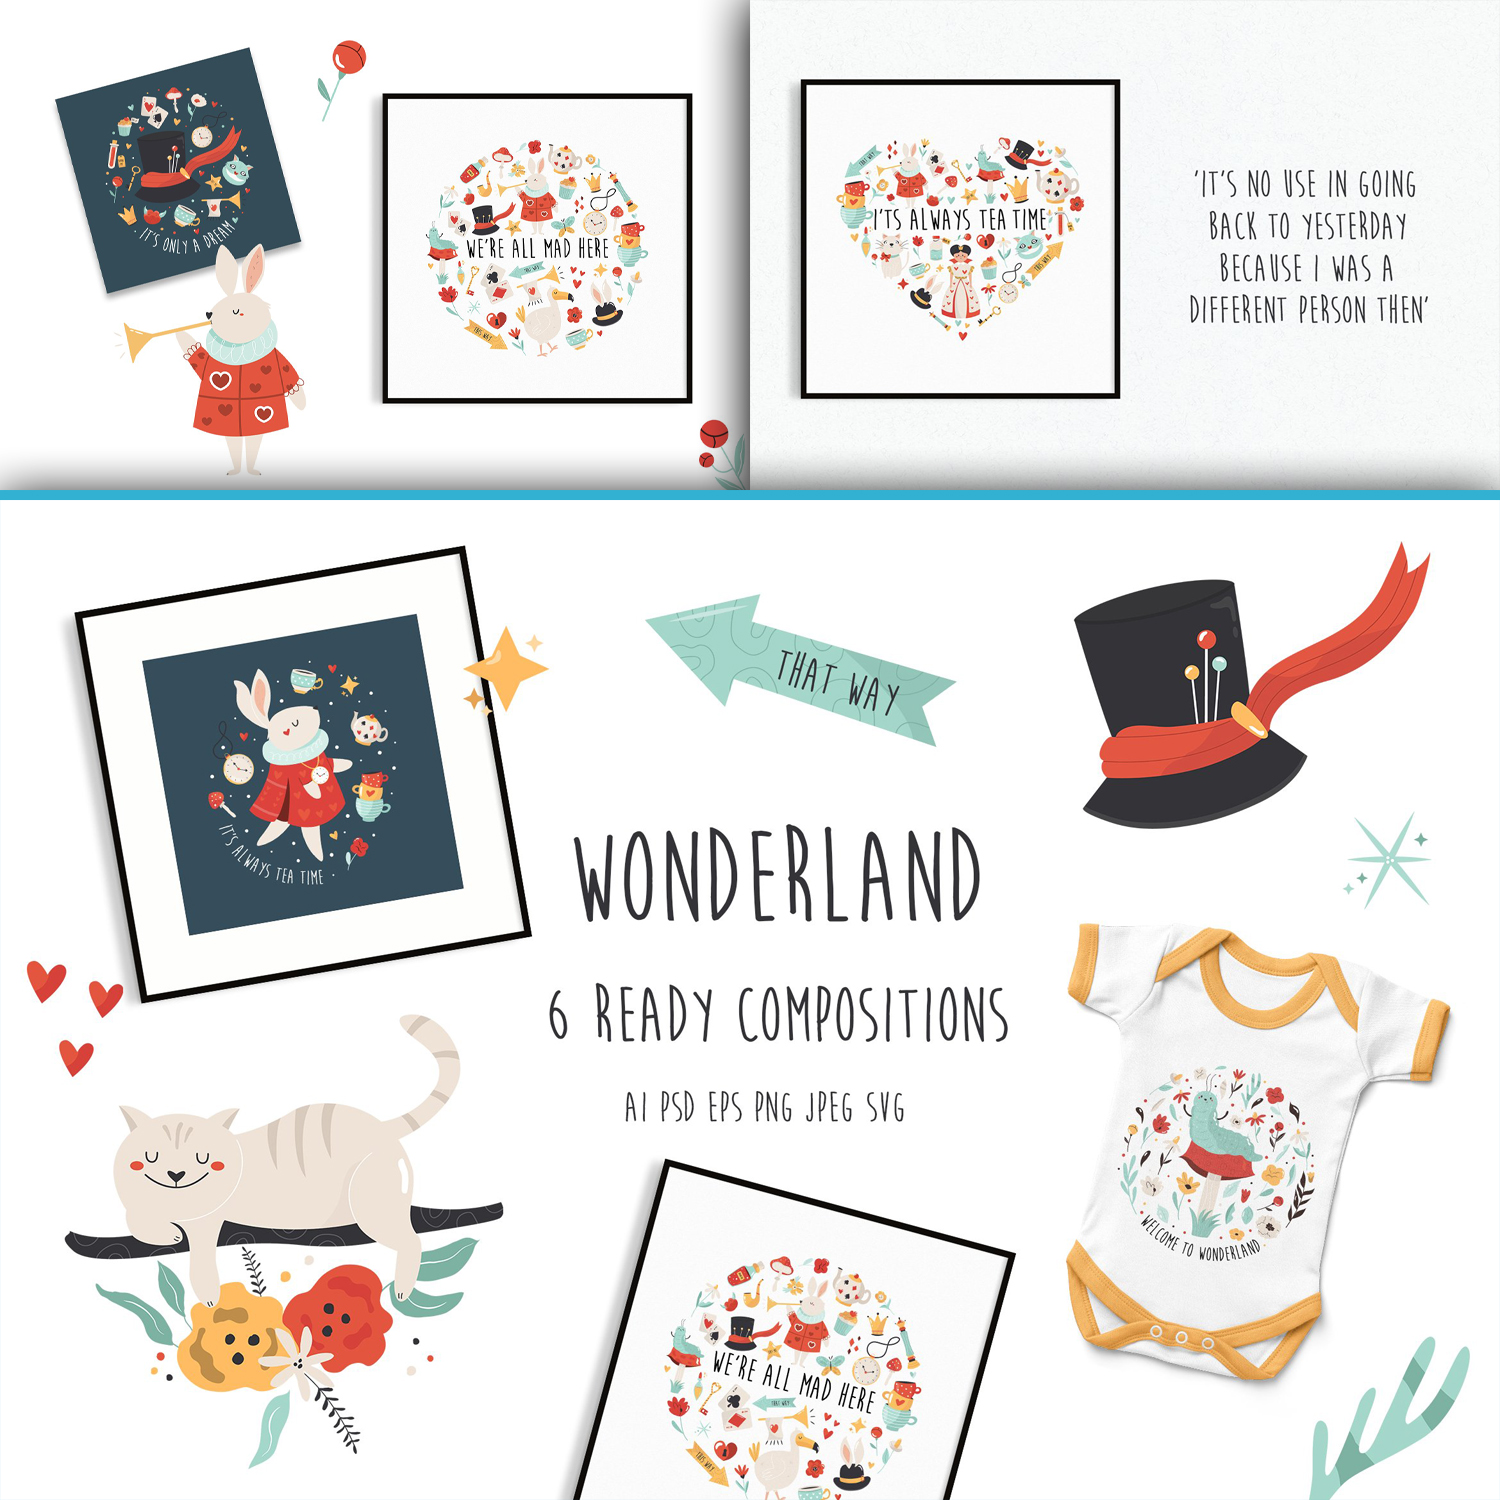 Preview alice in wonderland colorful designs.